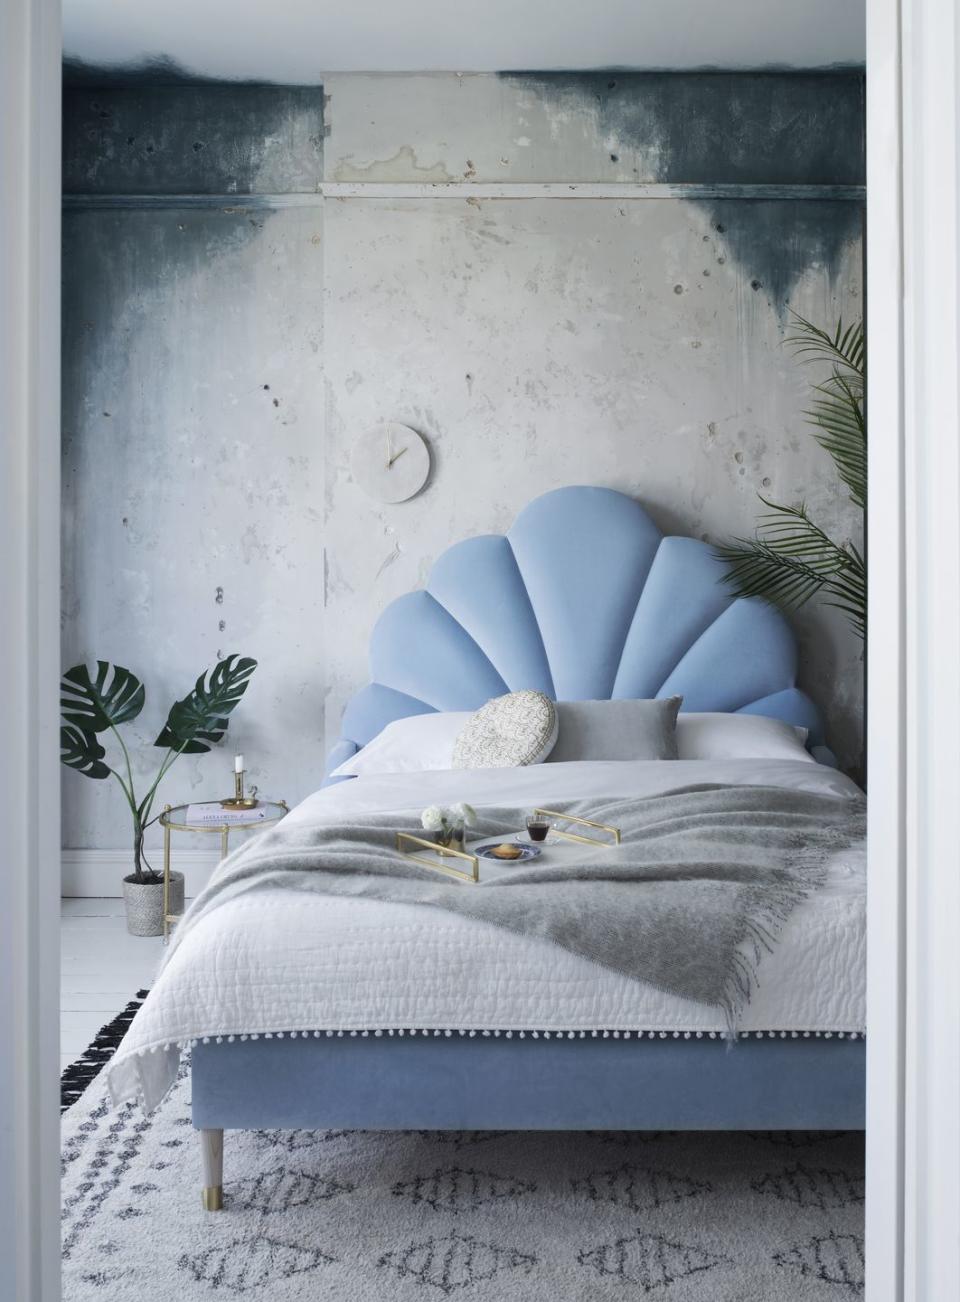 Dulux Colour of the Year inspiration: Velvet bed